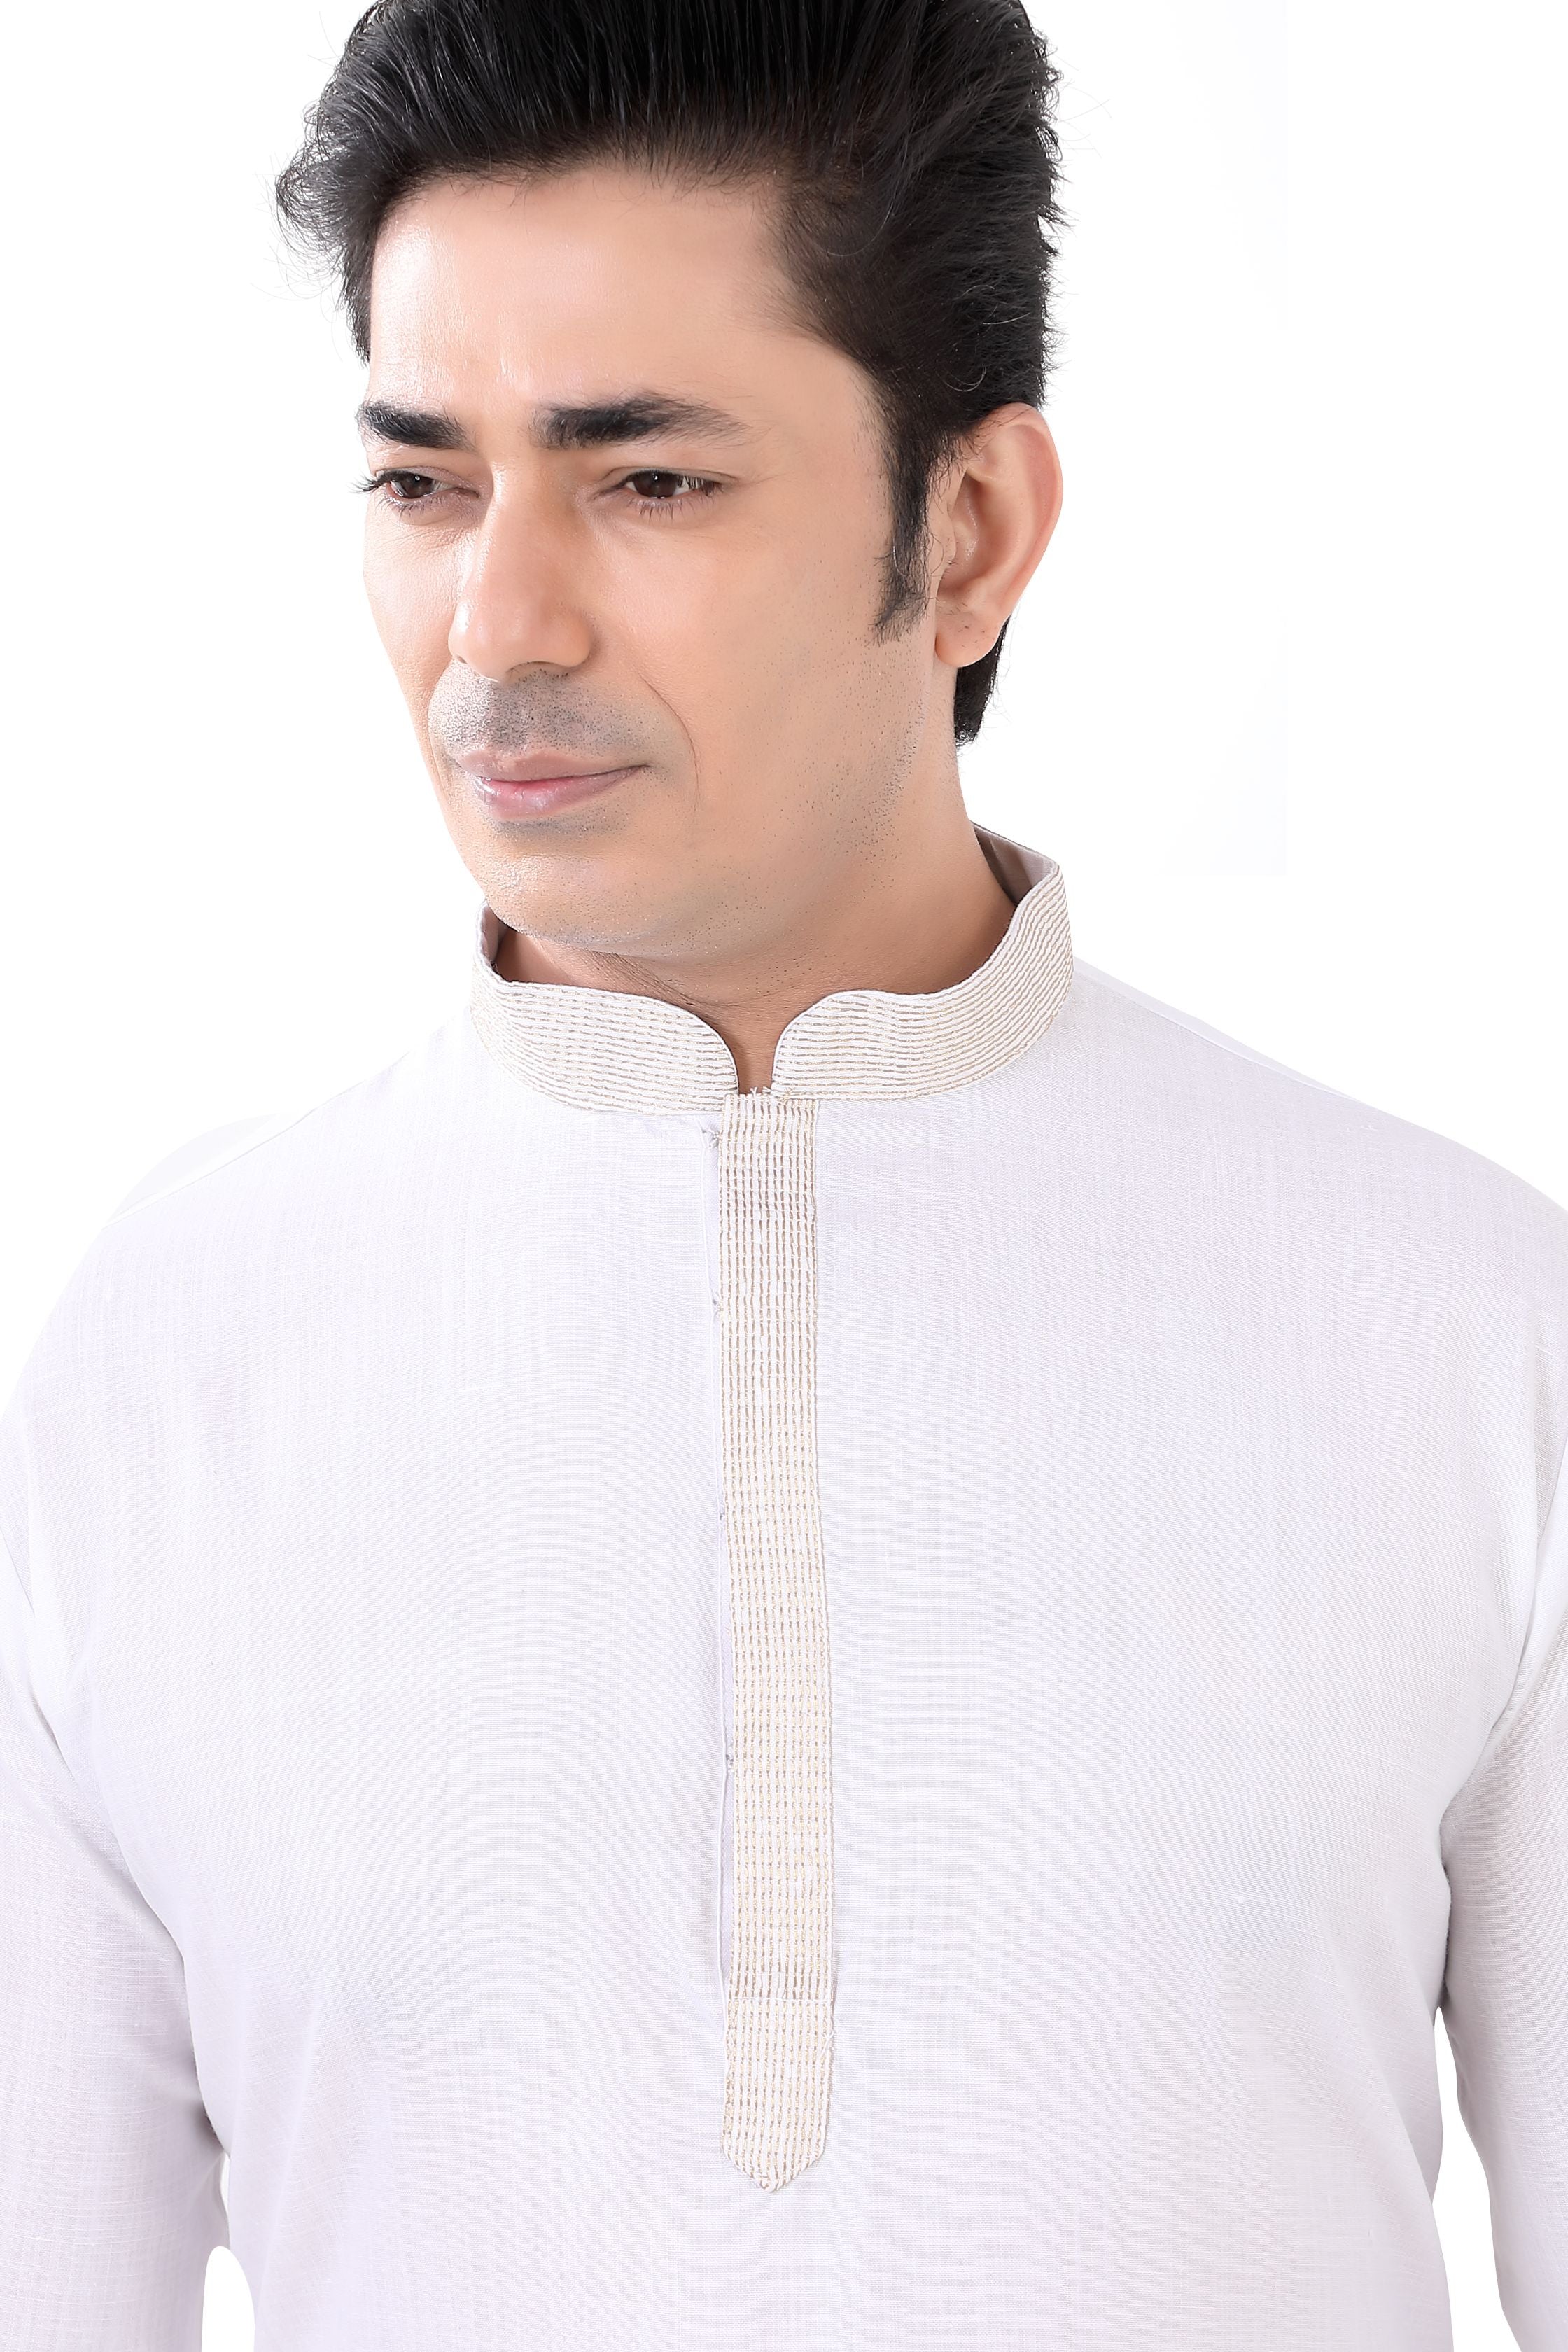 Cotton Anchor embroidery Kurta Pajama in White Colour - Premium kurta pajama from Dapper Ethnic - Just $59! Shop now at Dulhan Exclusives